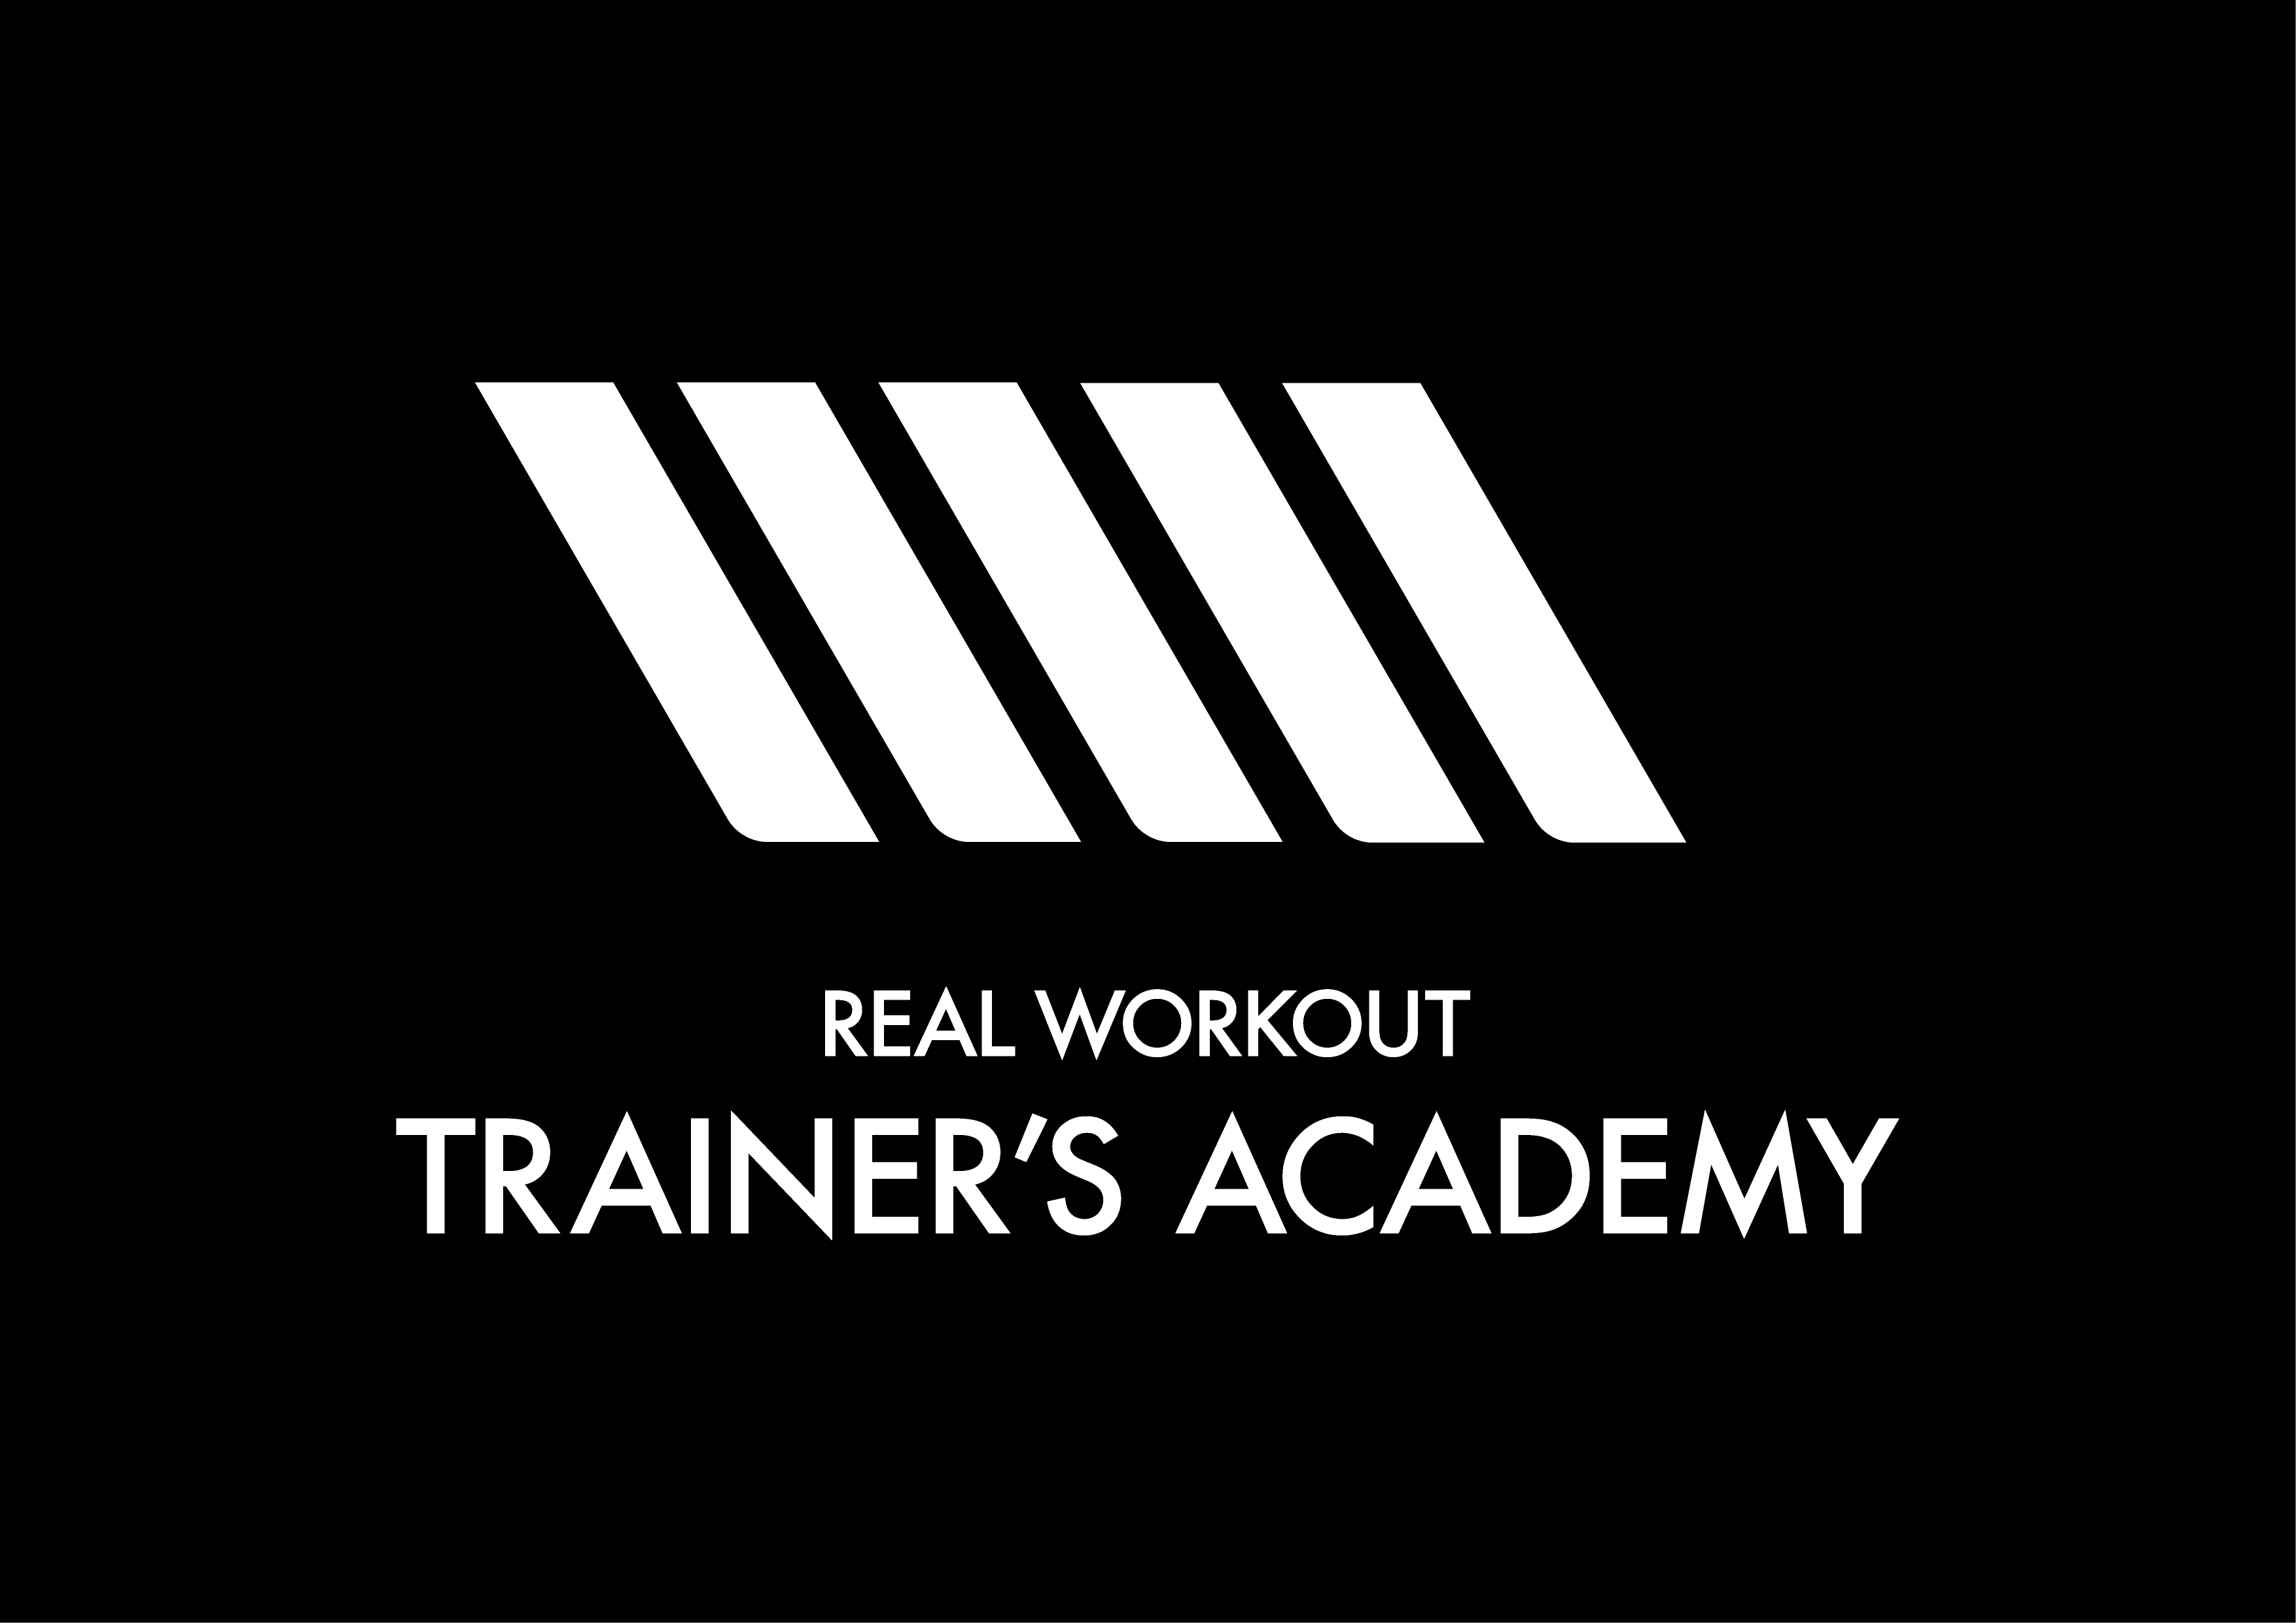 REAL WORKOUT TRAINER'S ACADEMY